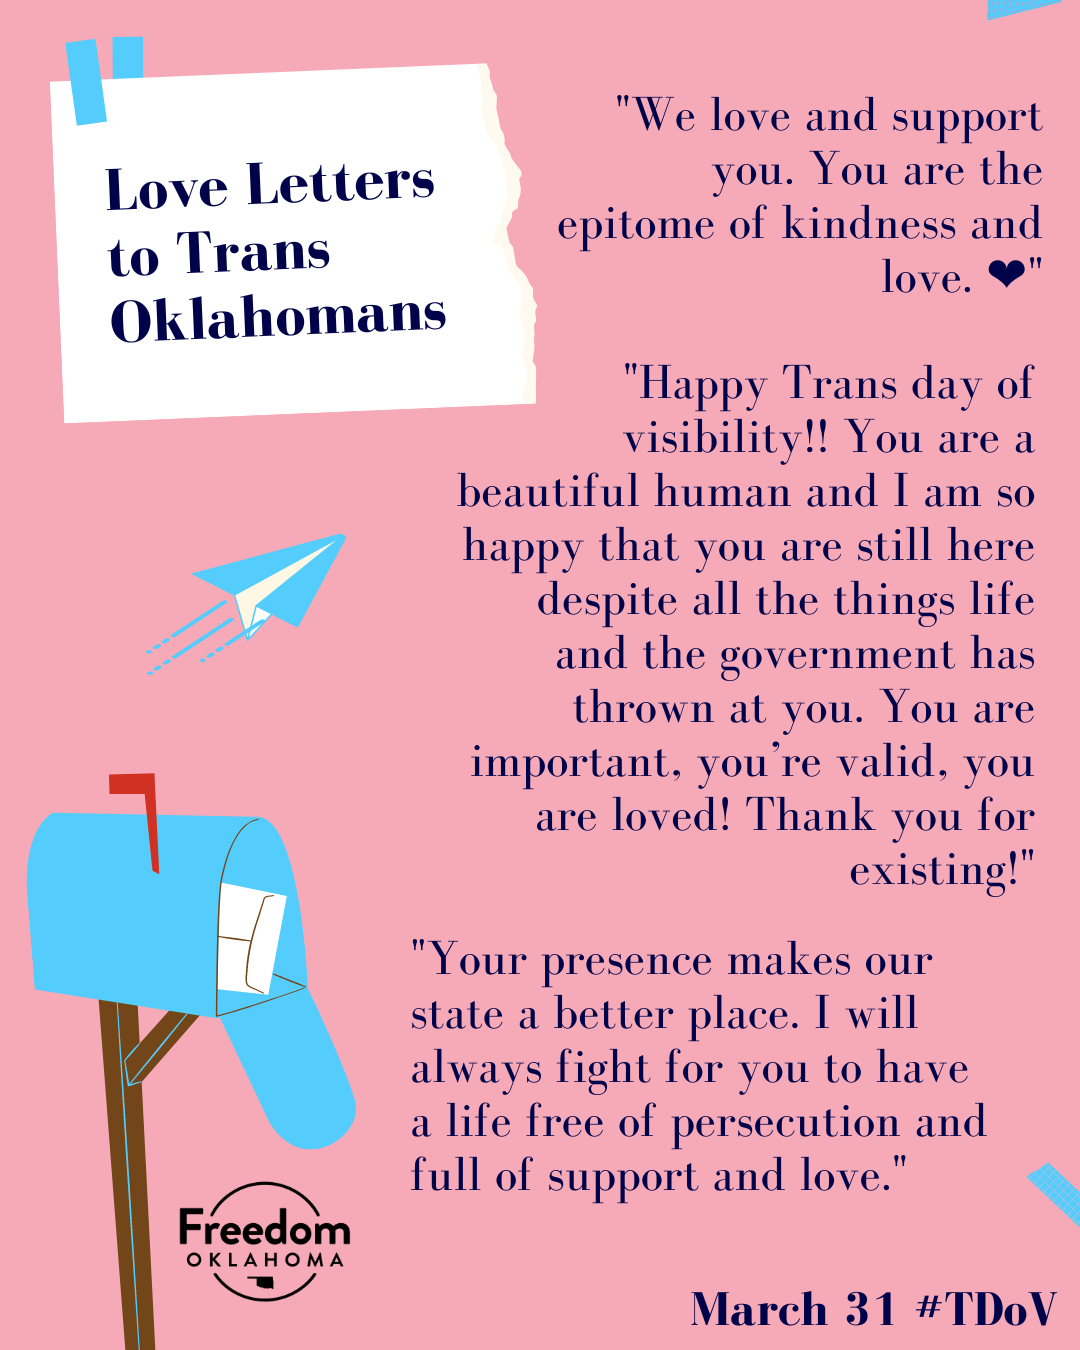  Similar pink graphic with one love letter: "Dear Trans, Non-binary, and Gender Expansive youth of Oklahoma. All I want is for each and every single one of you to have the biggest, most beautiful, free and boundless life you can imagine. I want to go